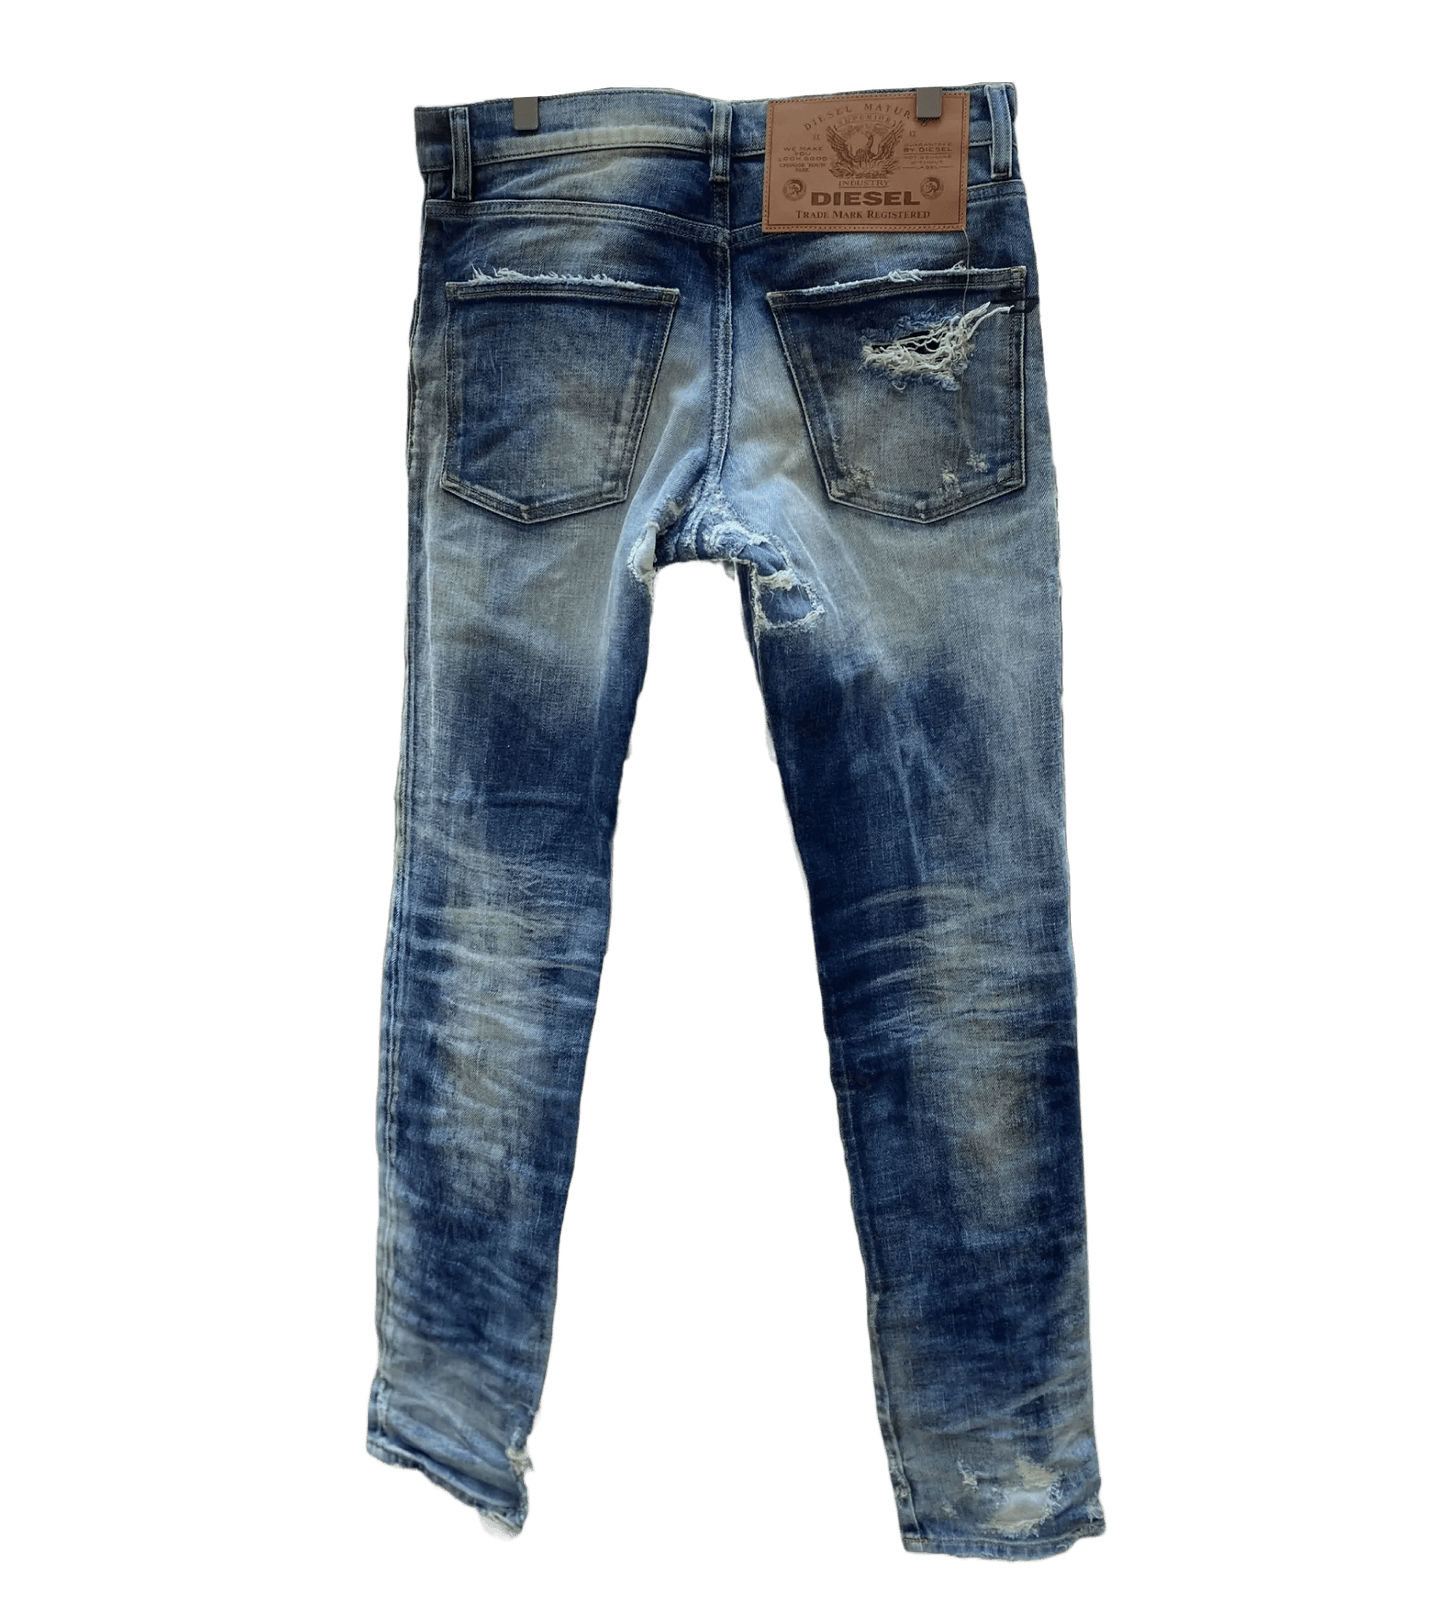 A pair of faded jeans with a DIESEL D-KRAS-X-SP4 09VI DENIM label on them.